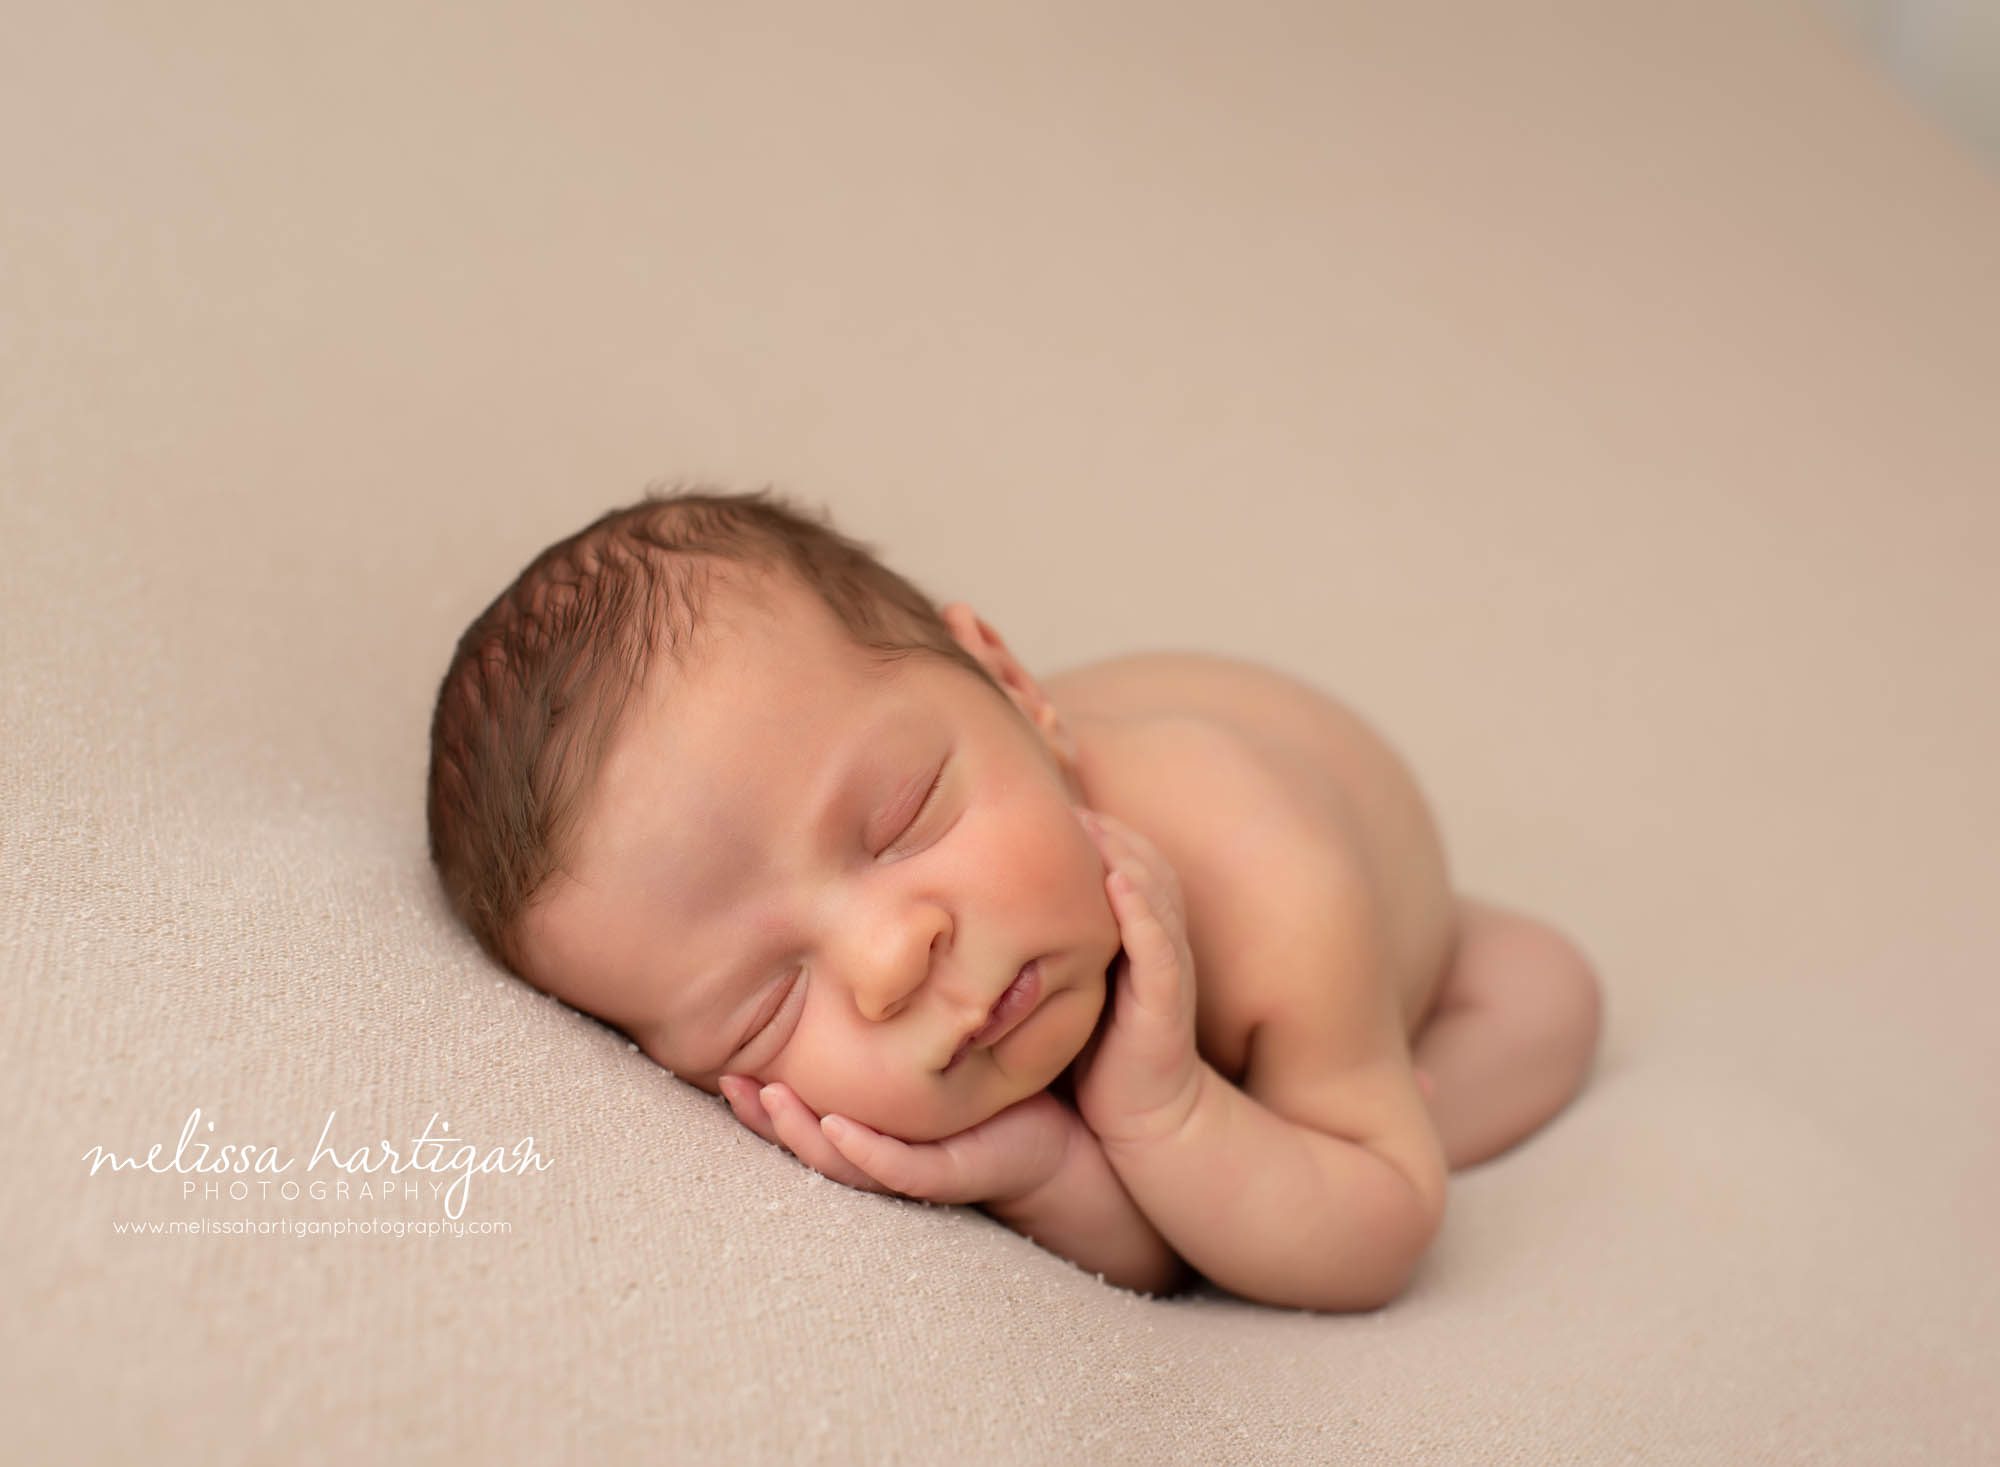 baby boy posed on side with hands under chin light tan colored backdrop posed newborn photography